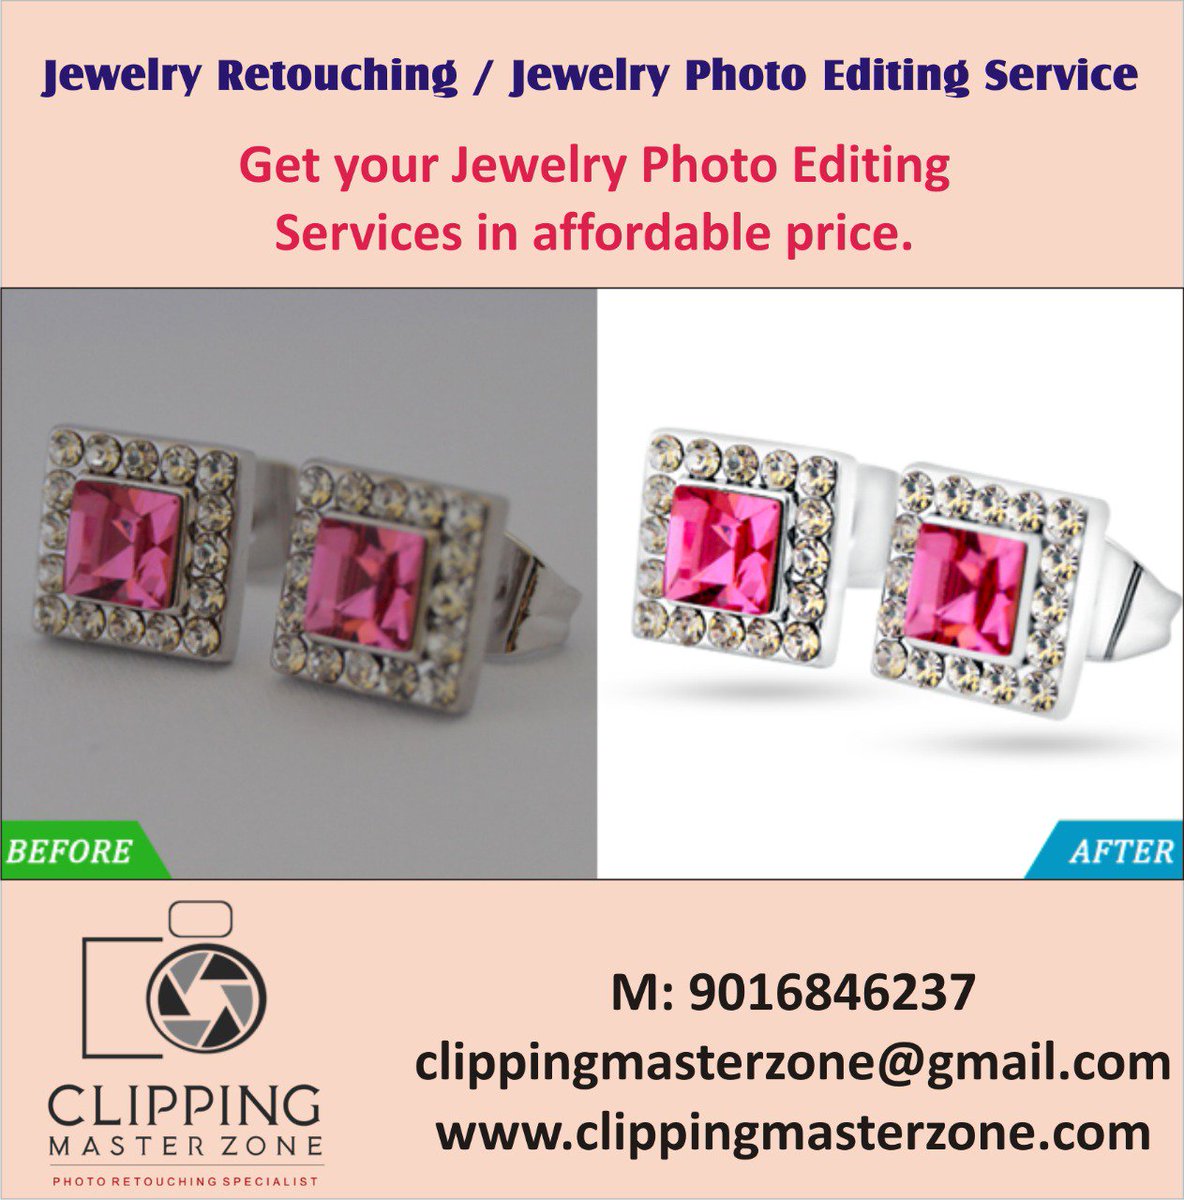 Jewelry retouching services- Best Jewelry photo retouching services for commercial photographer at comfortable pricing .

For more Details: clippingmasterzone.com

Contact : 9016846237

#jewelryretouchingservices #clippingmasterzone #india #USA #UK #canada #Europe #Australia